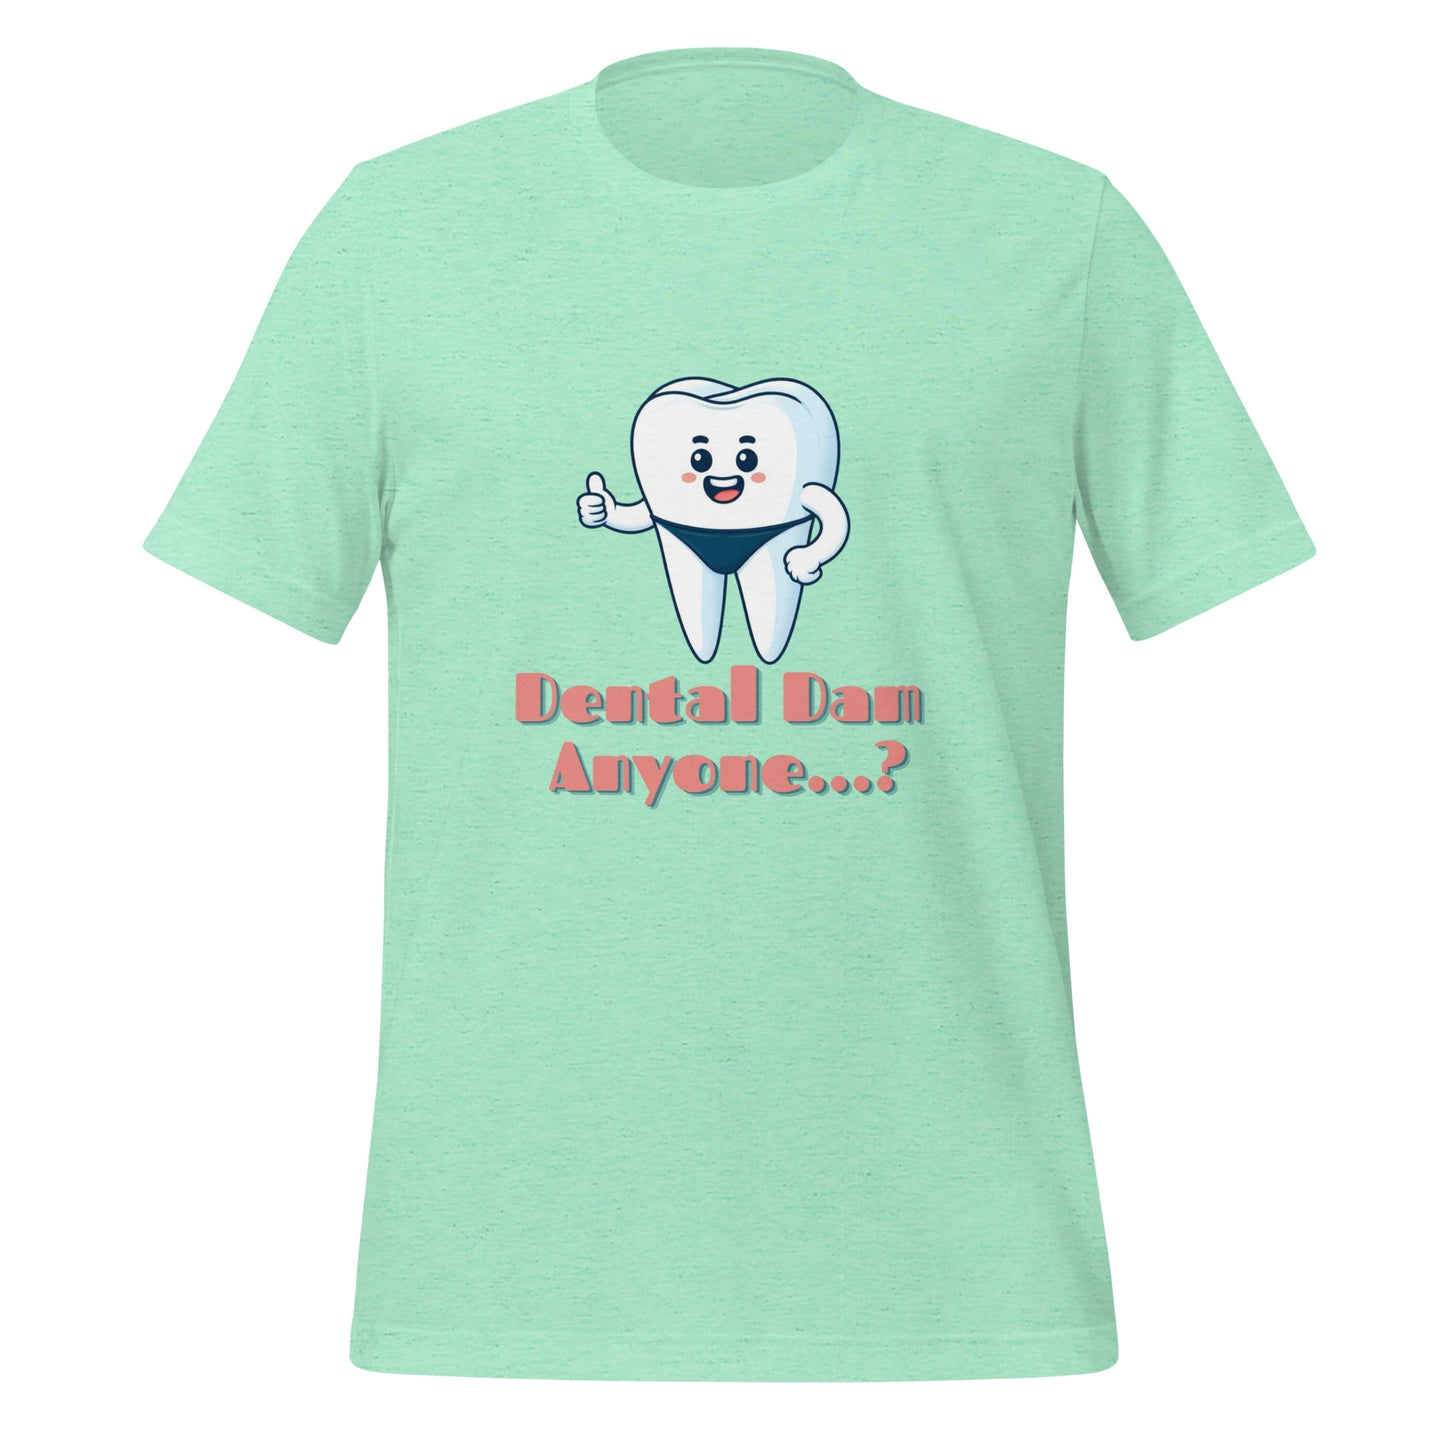 Funny dental shirt featuring a playful tooth character in a speedo with the text ‘Dental Dam Anyone?’, perfect for dentists, dental hygienists, and dental students who enjoy dental humor. This dental shirt is a unique addition to any dental professional’s wardrobe, making it an ideal dental office shirt. Don’t miss out on our dental assistant shirts and dental hygiene shirts. Heather mint color.